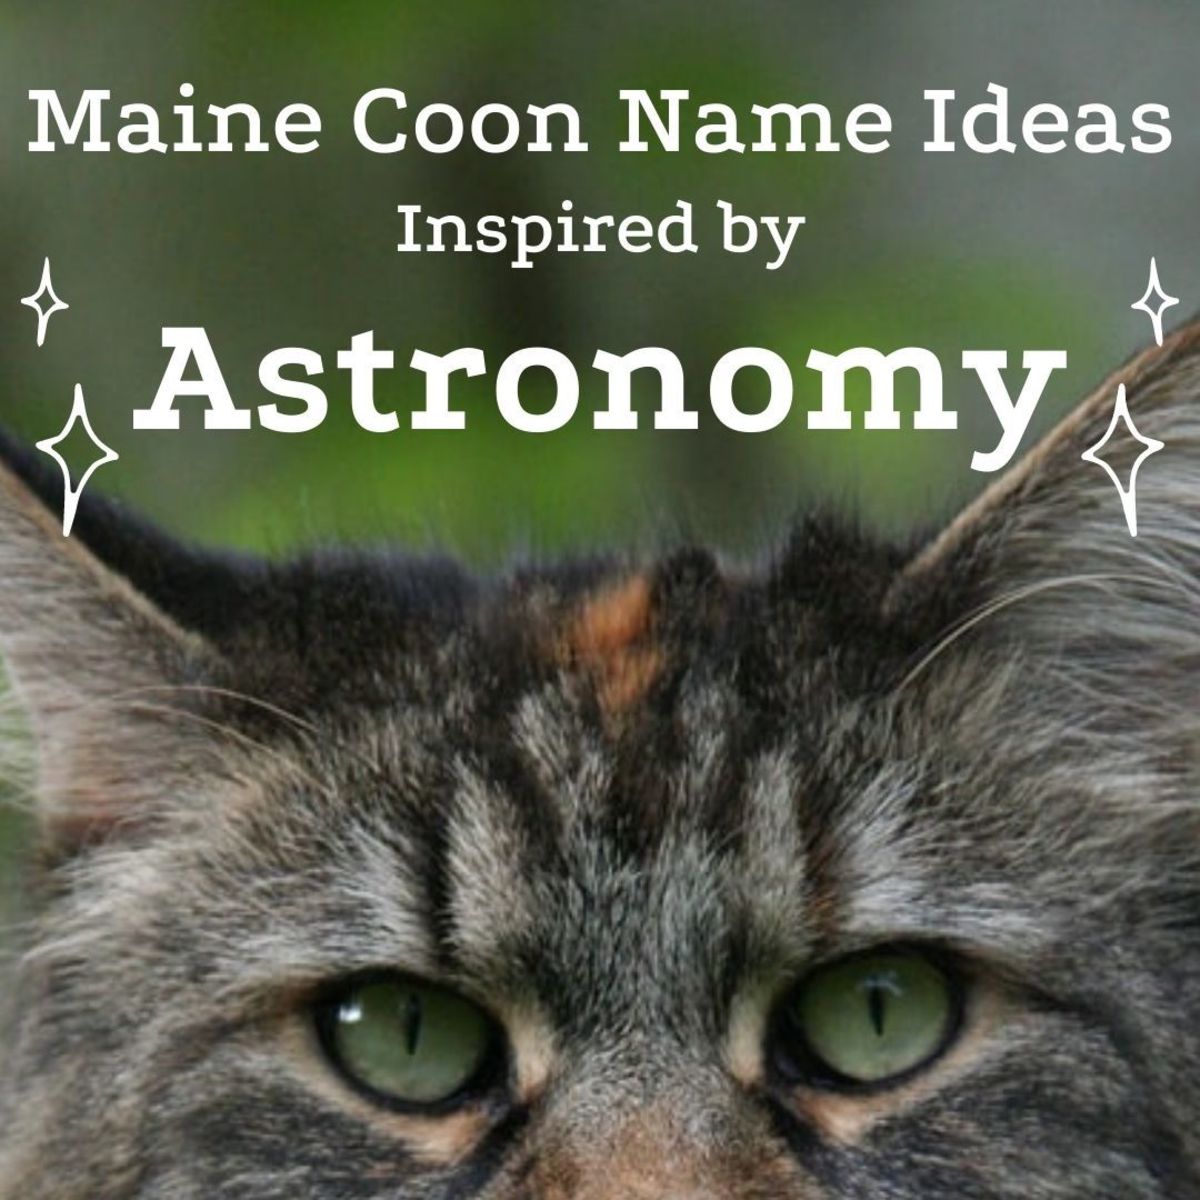 15 Astronomical Names for Maine Coon Cats (From Apollo to Vulcan)